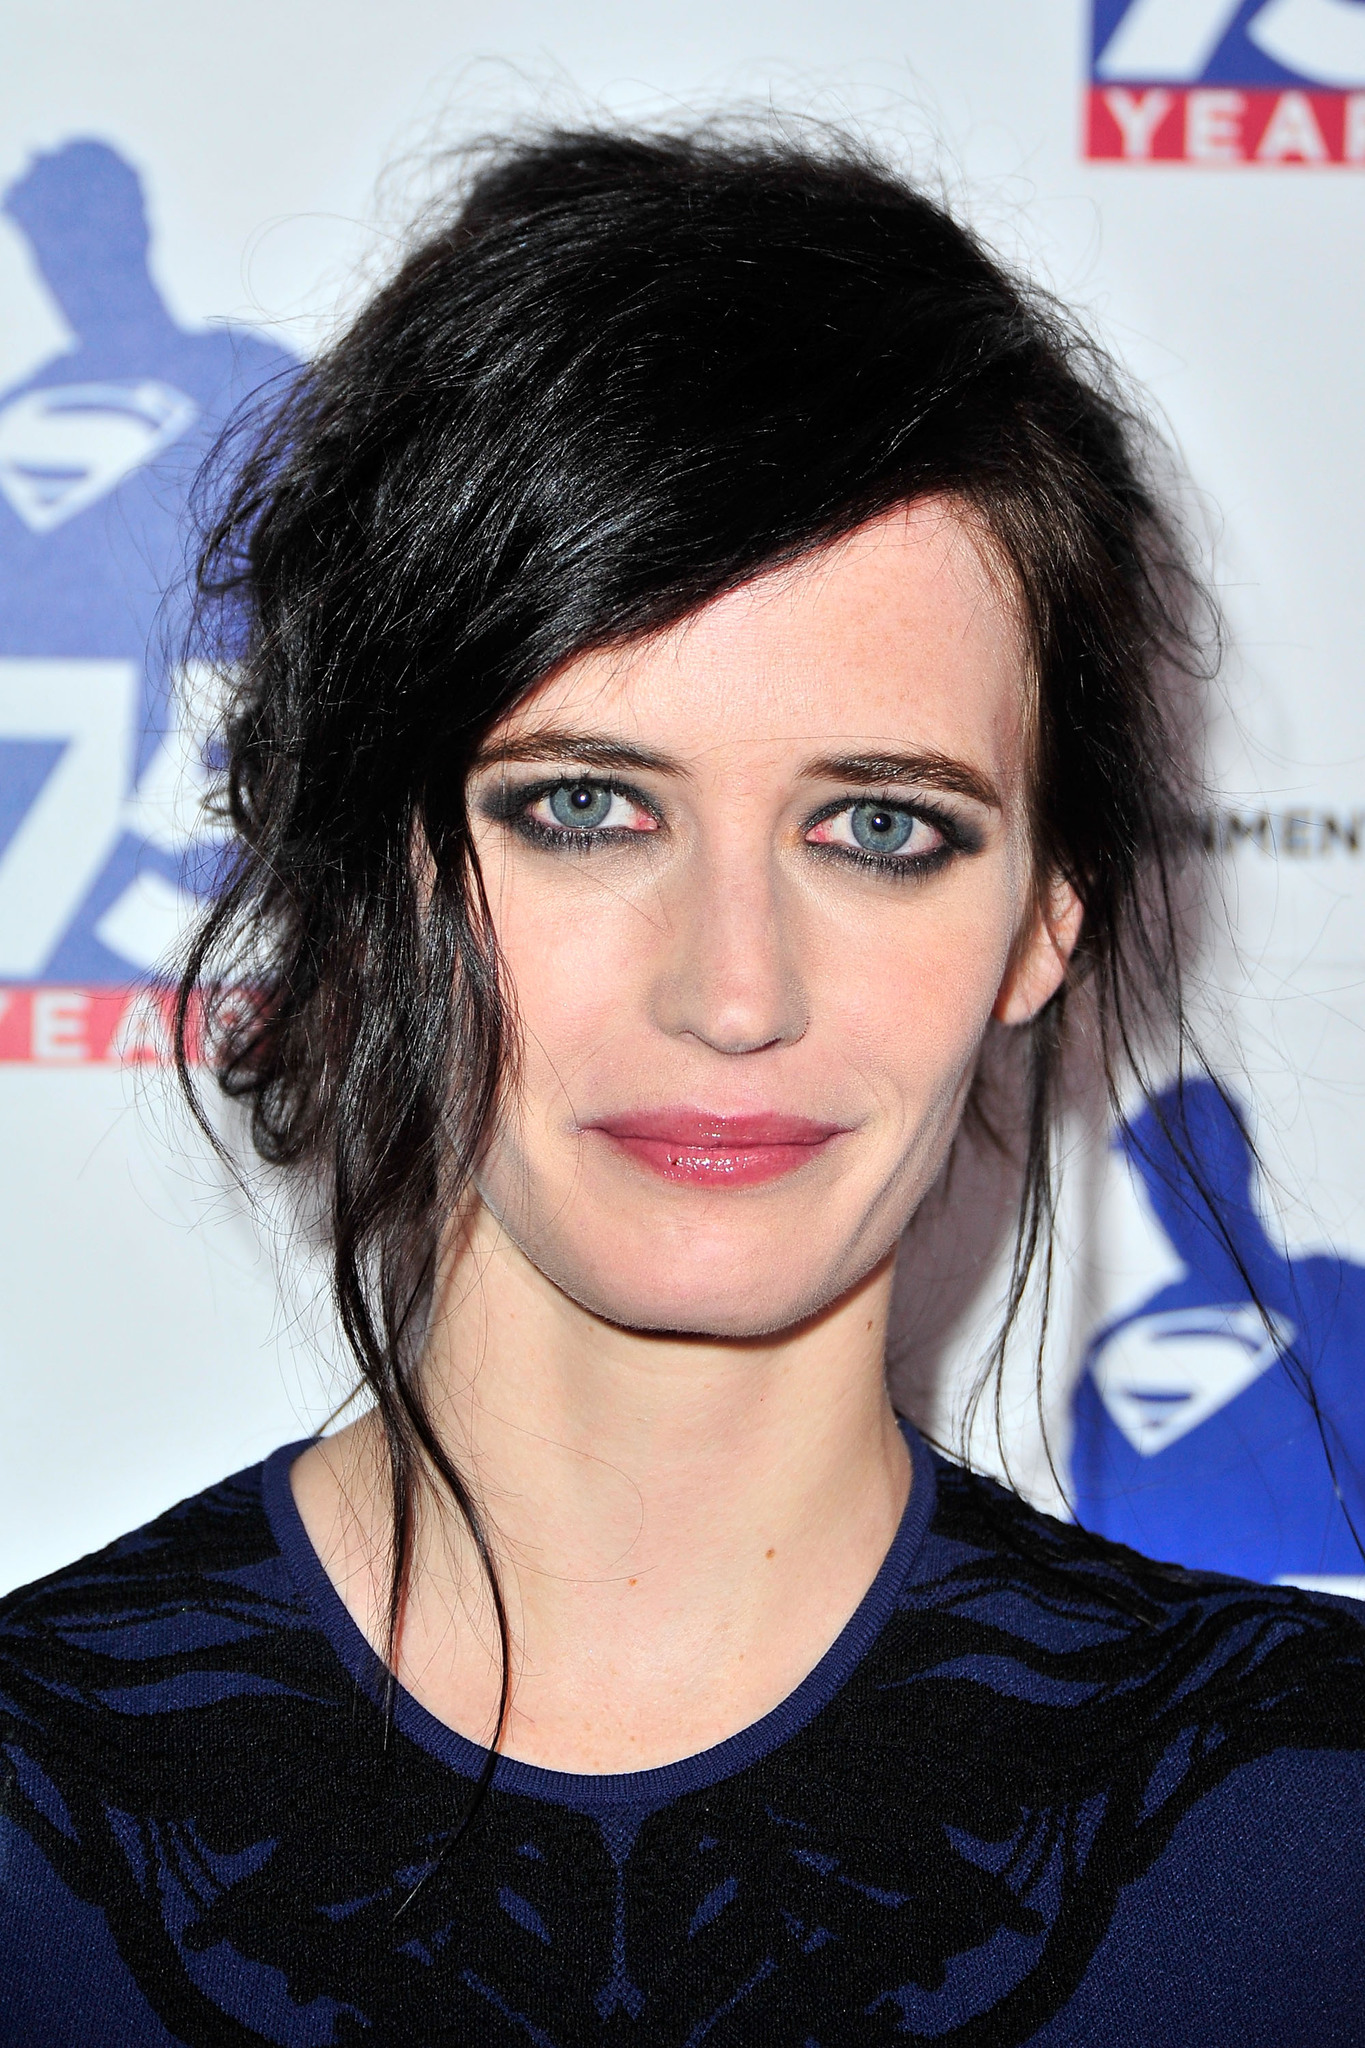 Eva Green at event of Zmogus is plieno (2013)